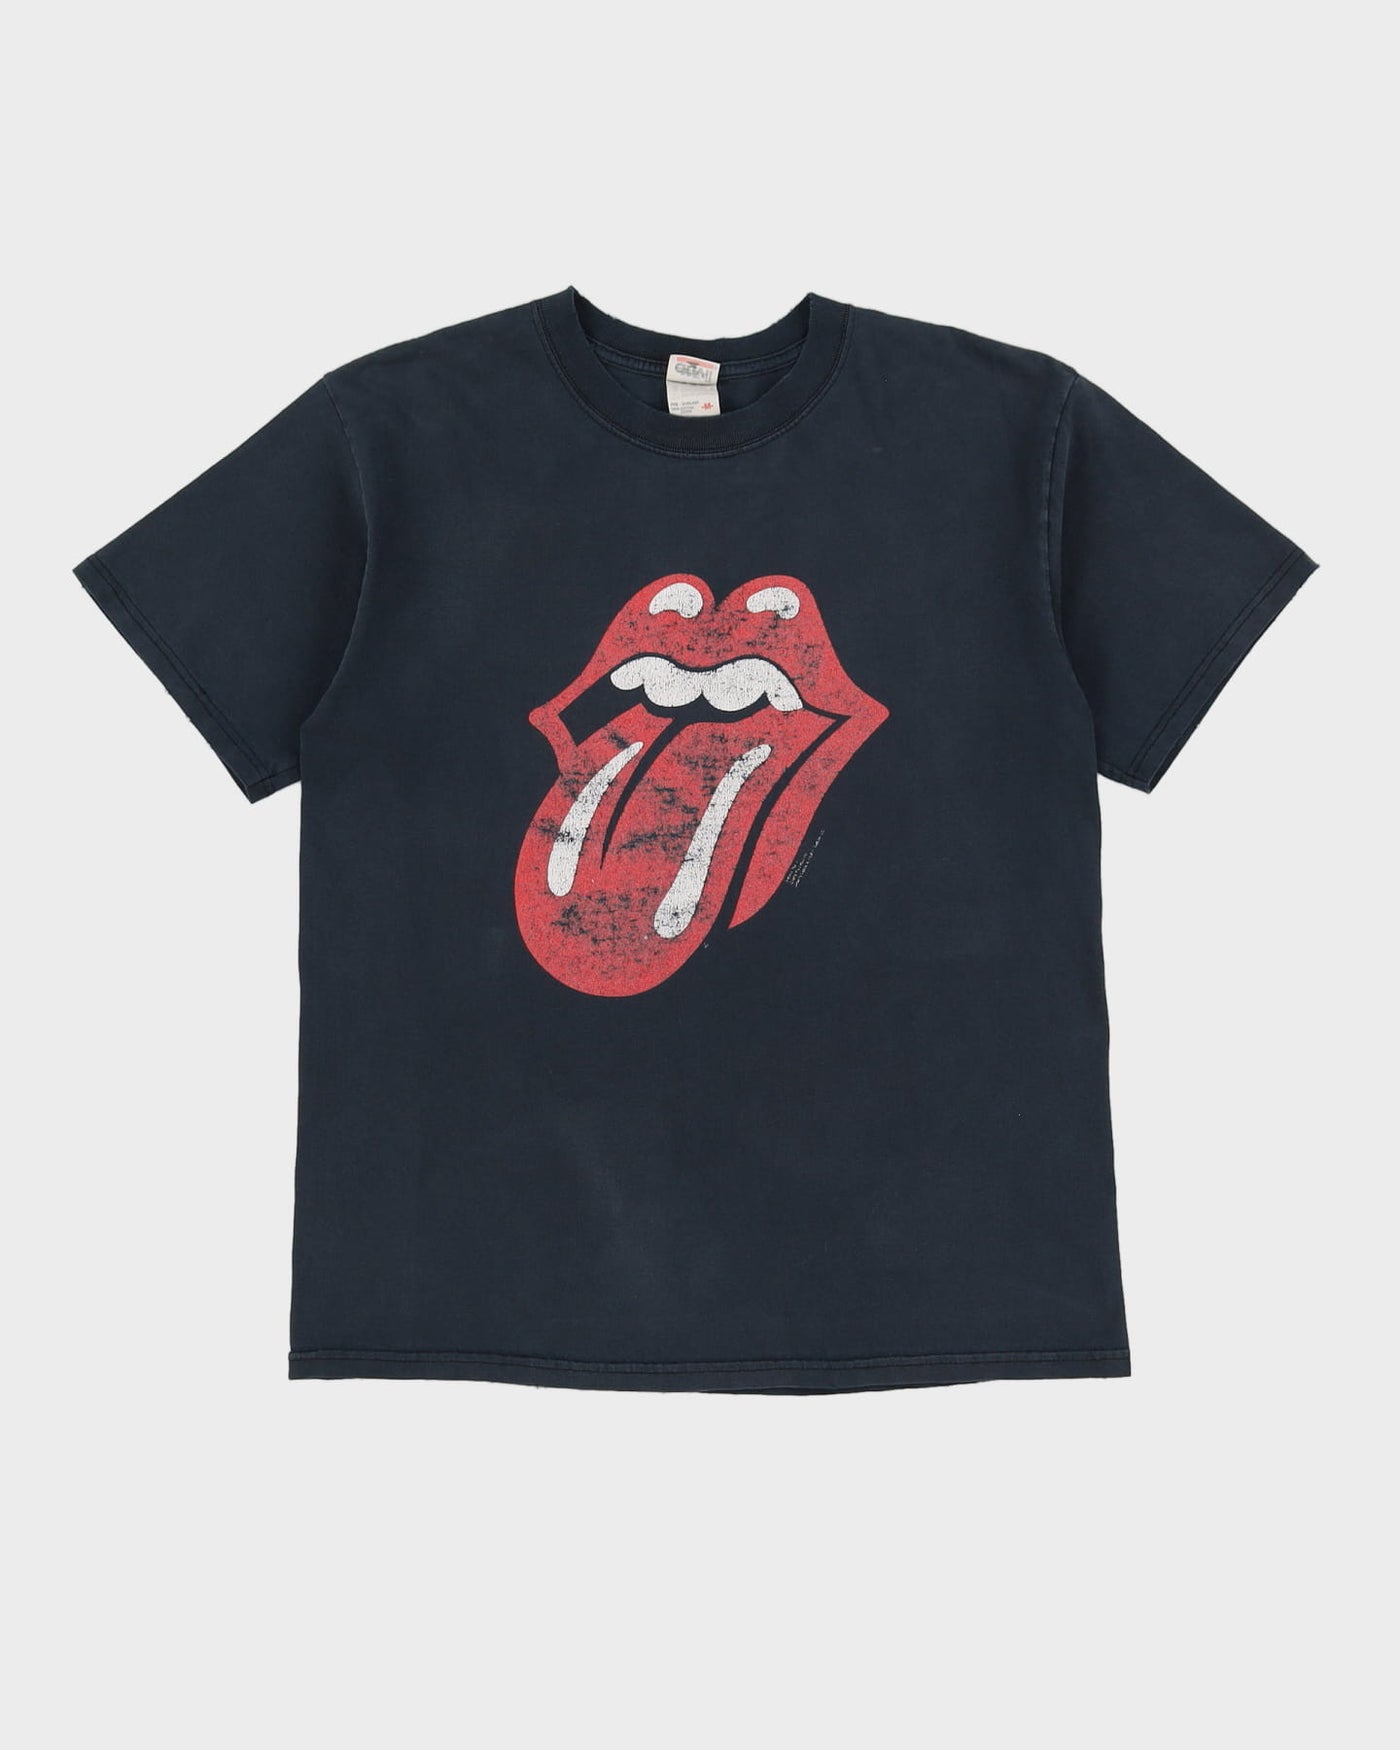 Vintage 90s The Rolling Stones Black Graphic Band T-Shirt - M